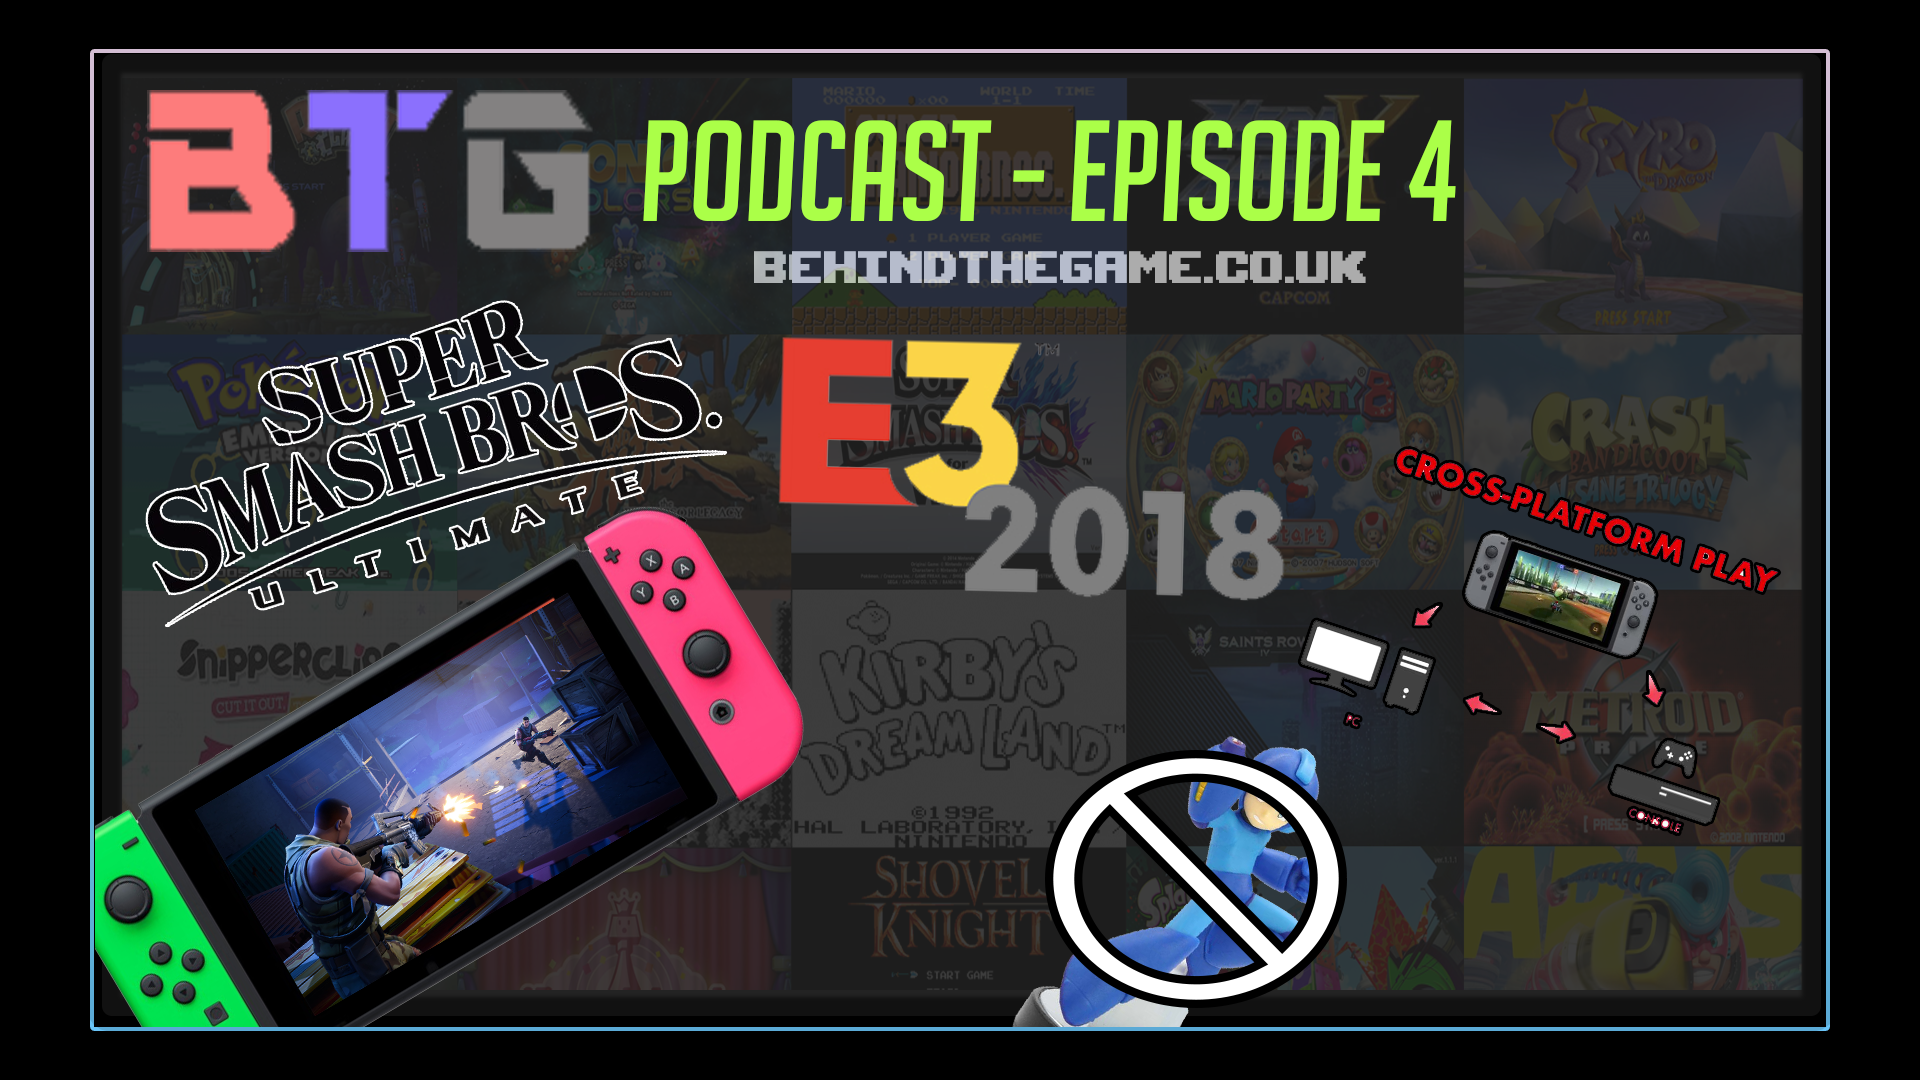 E3 2018 is a wrap and of course in our podcast we get to talk about it all, including Smash!